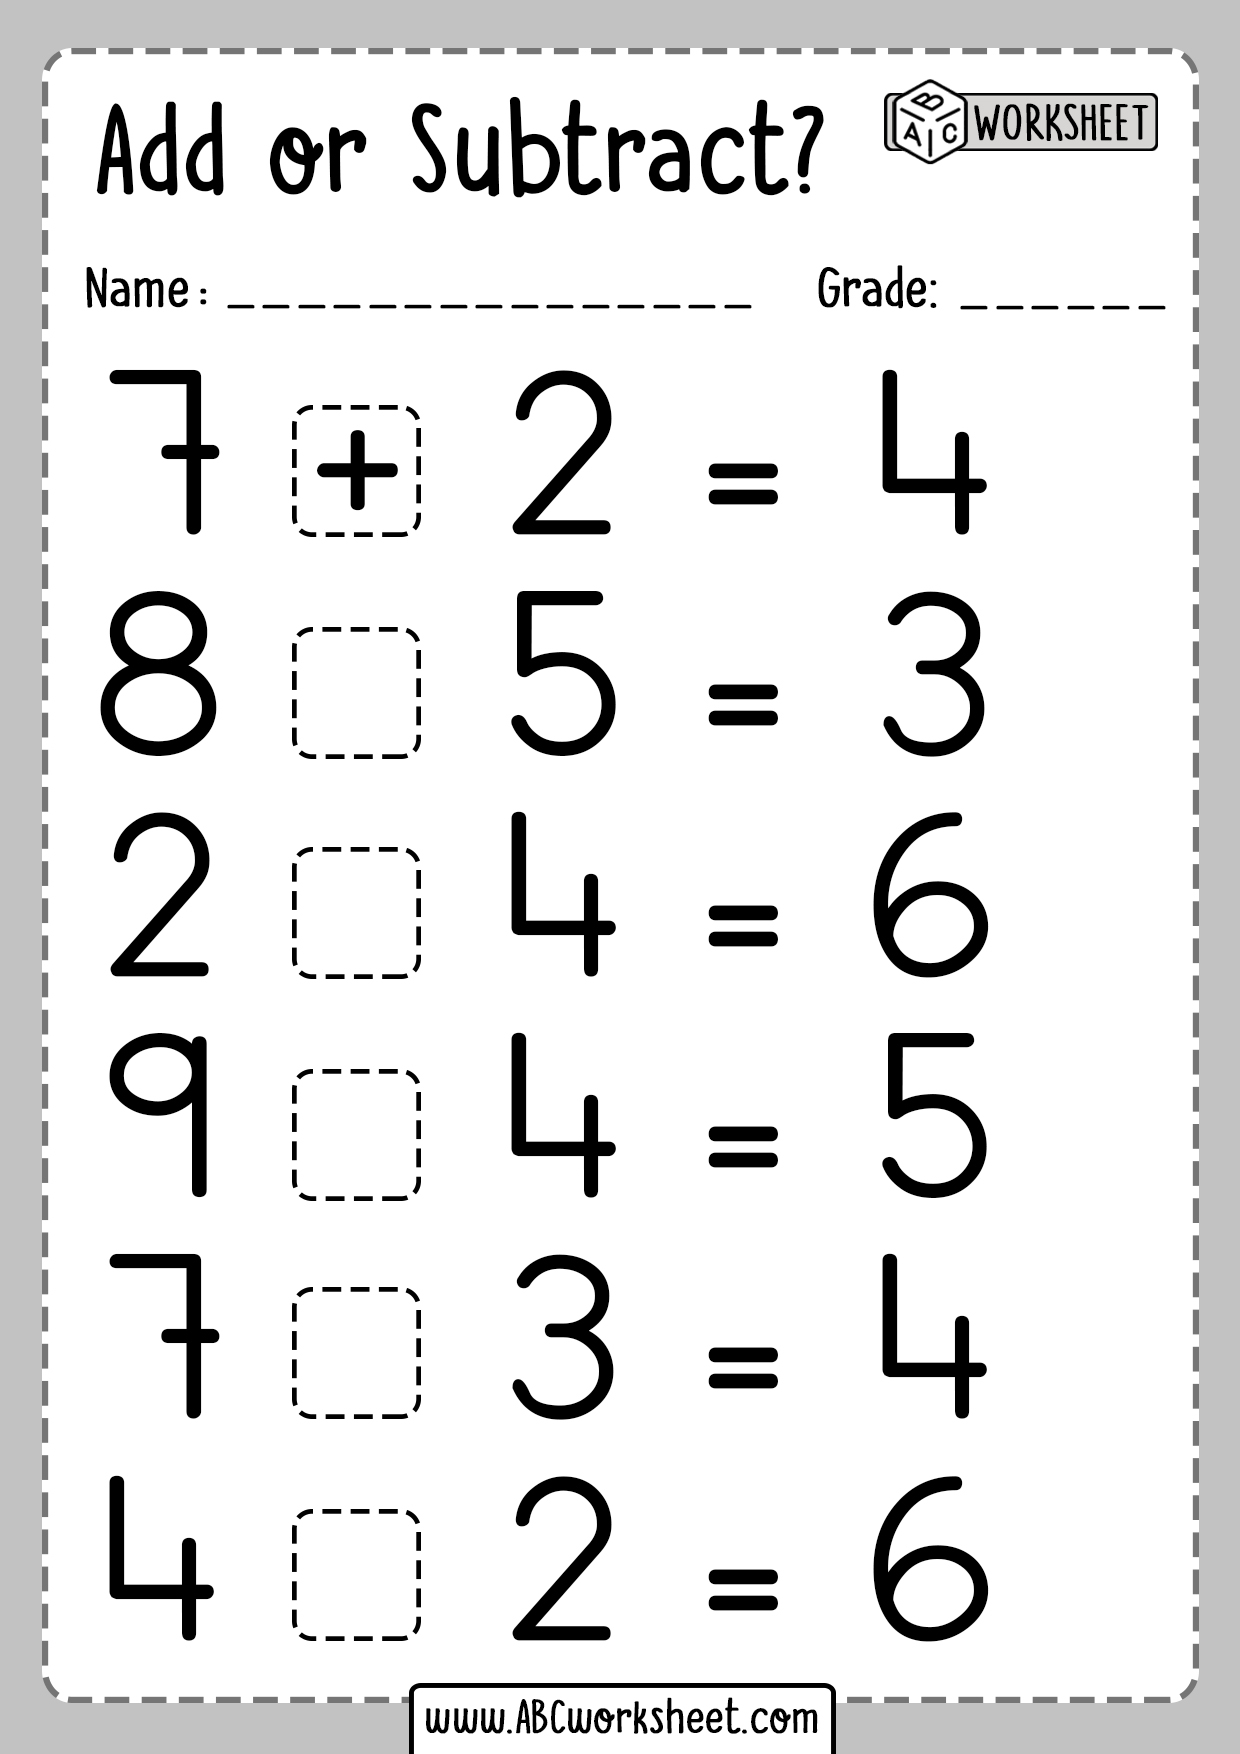 adding-and-subtracting-worksheets